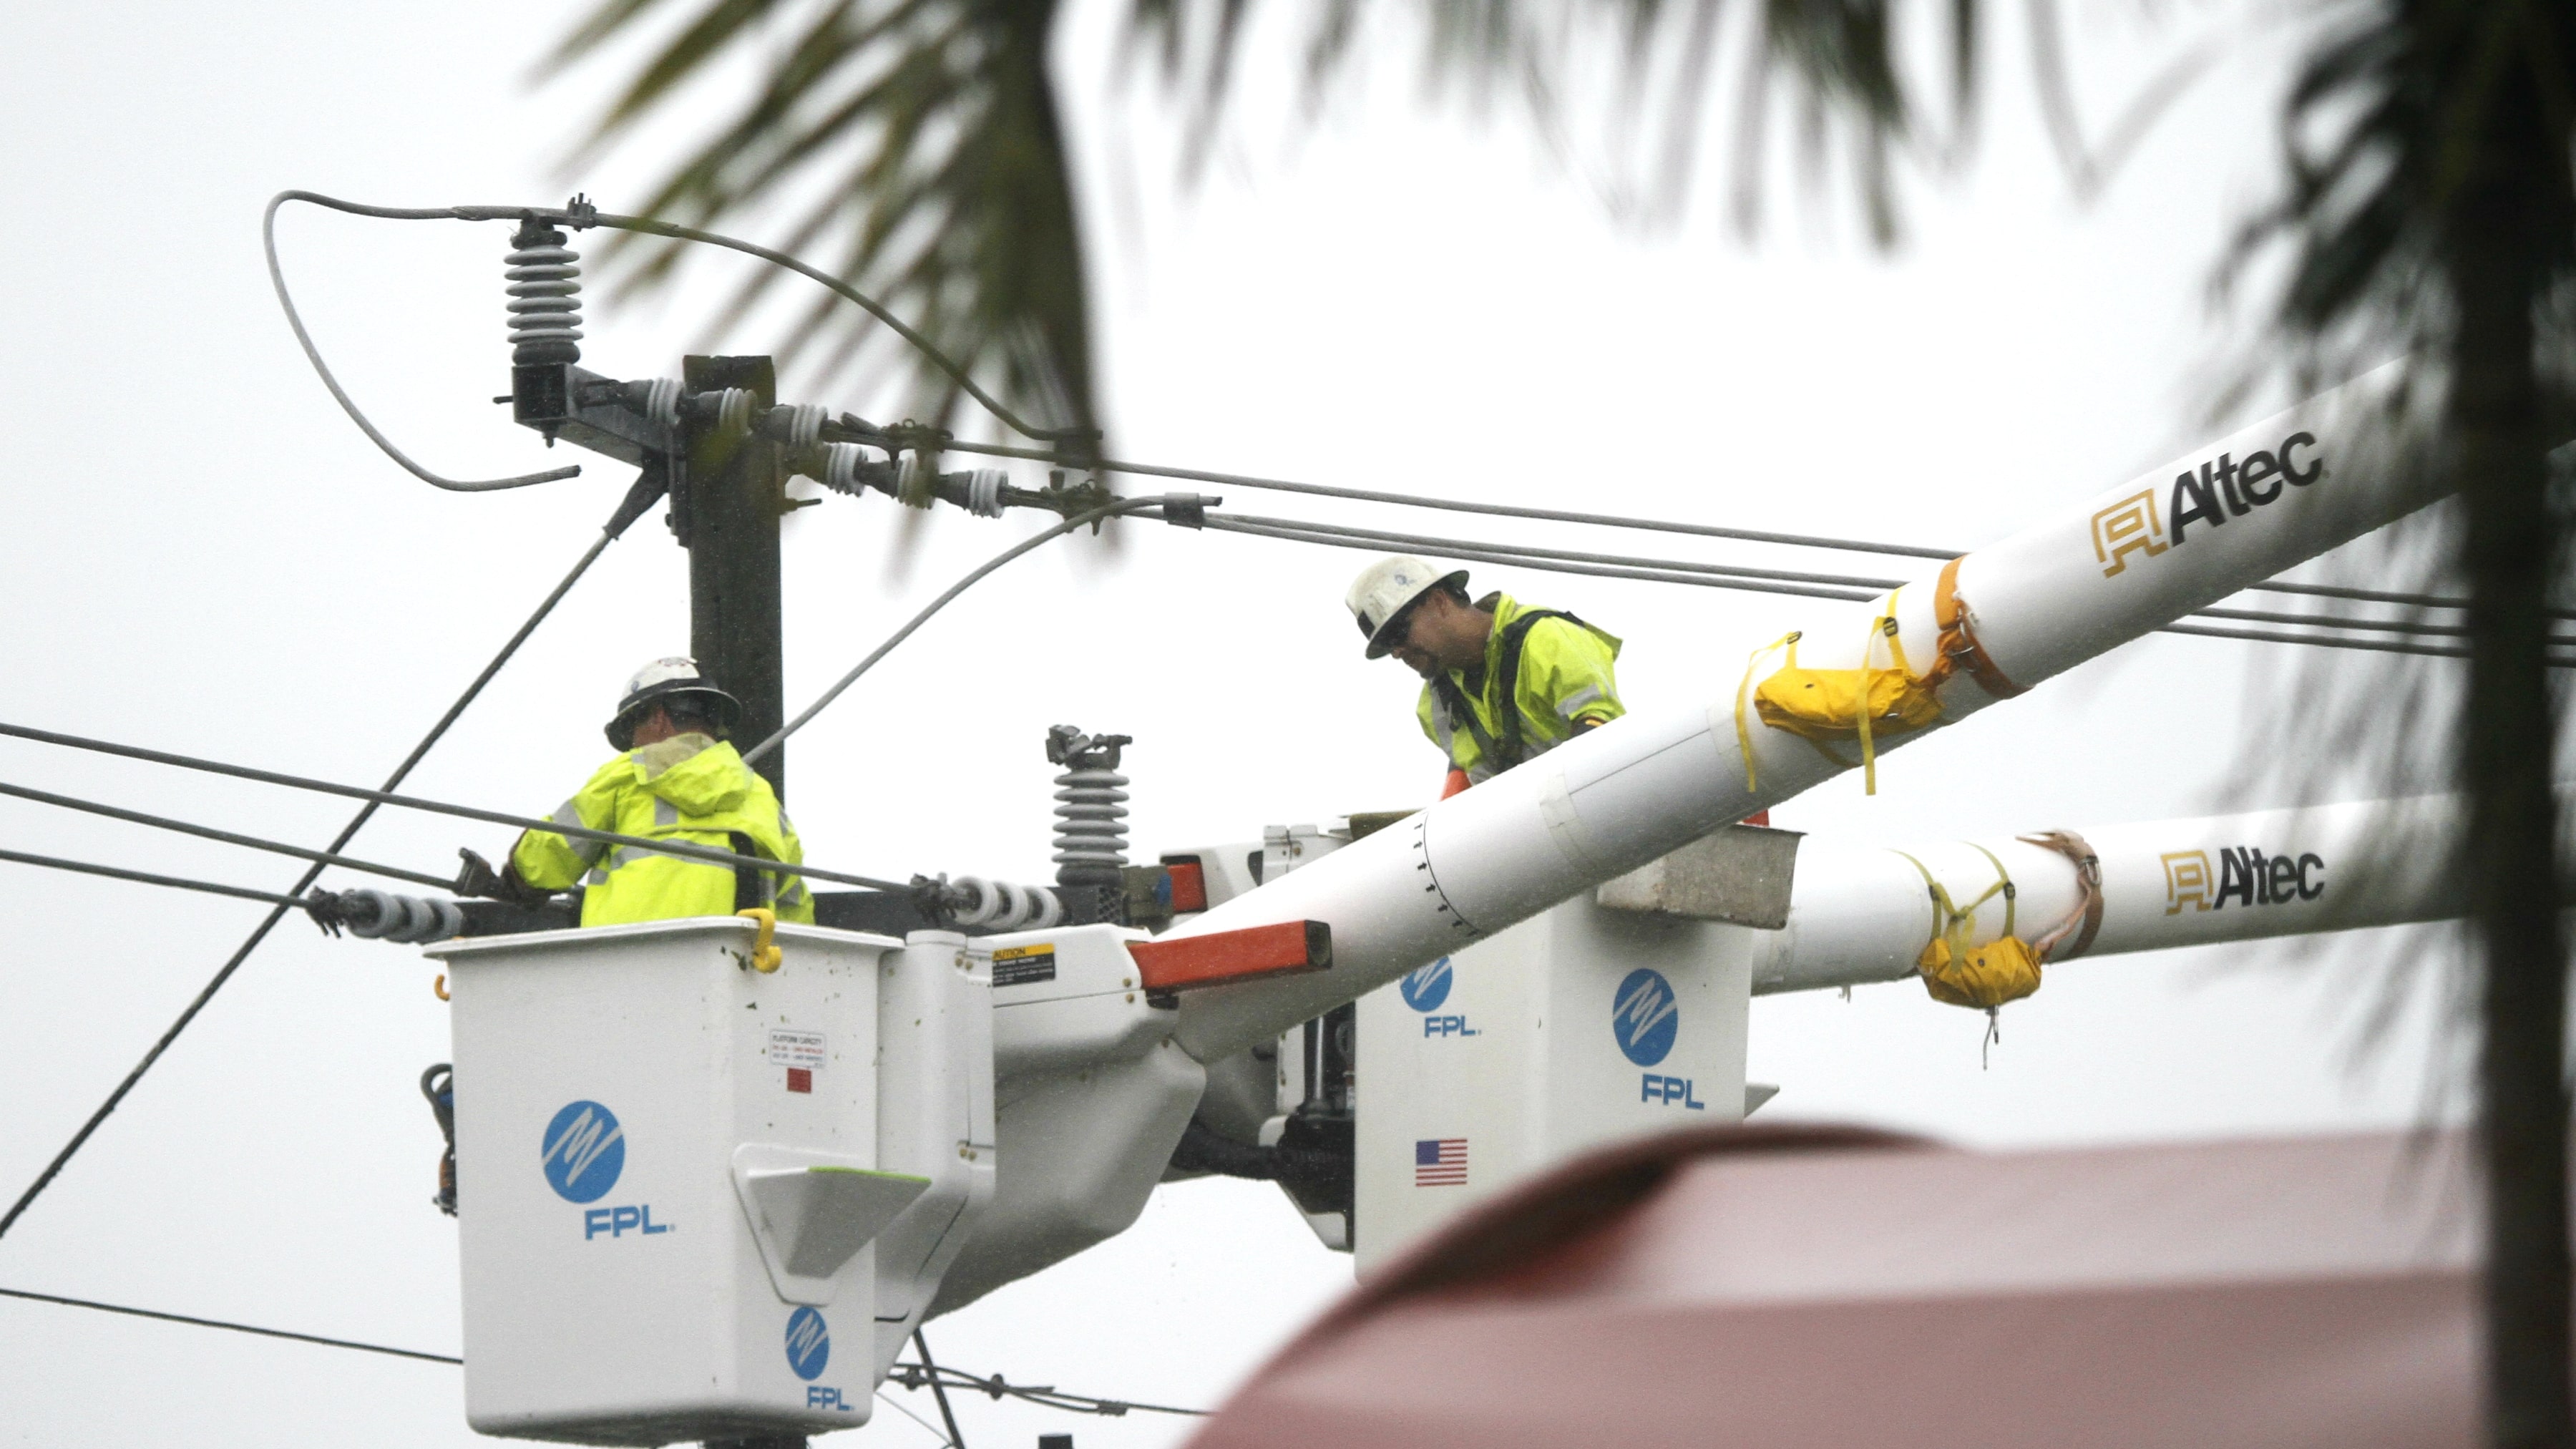 Two men in fluorescent yellow jackets and white hard hats work in cranes on an electrical line shaded by palm trees.